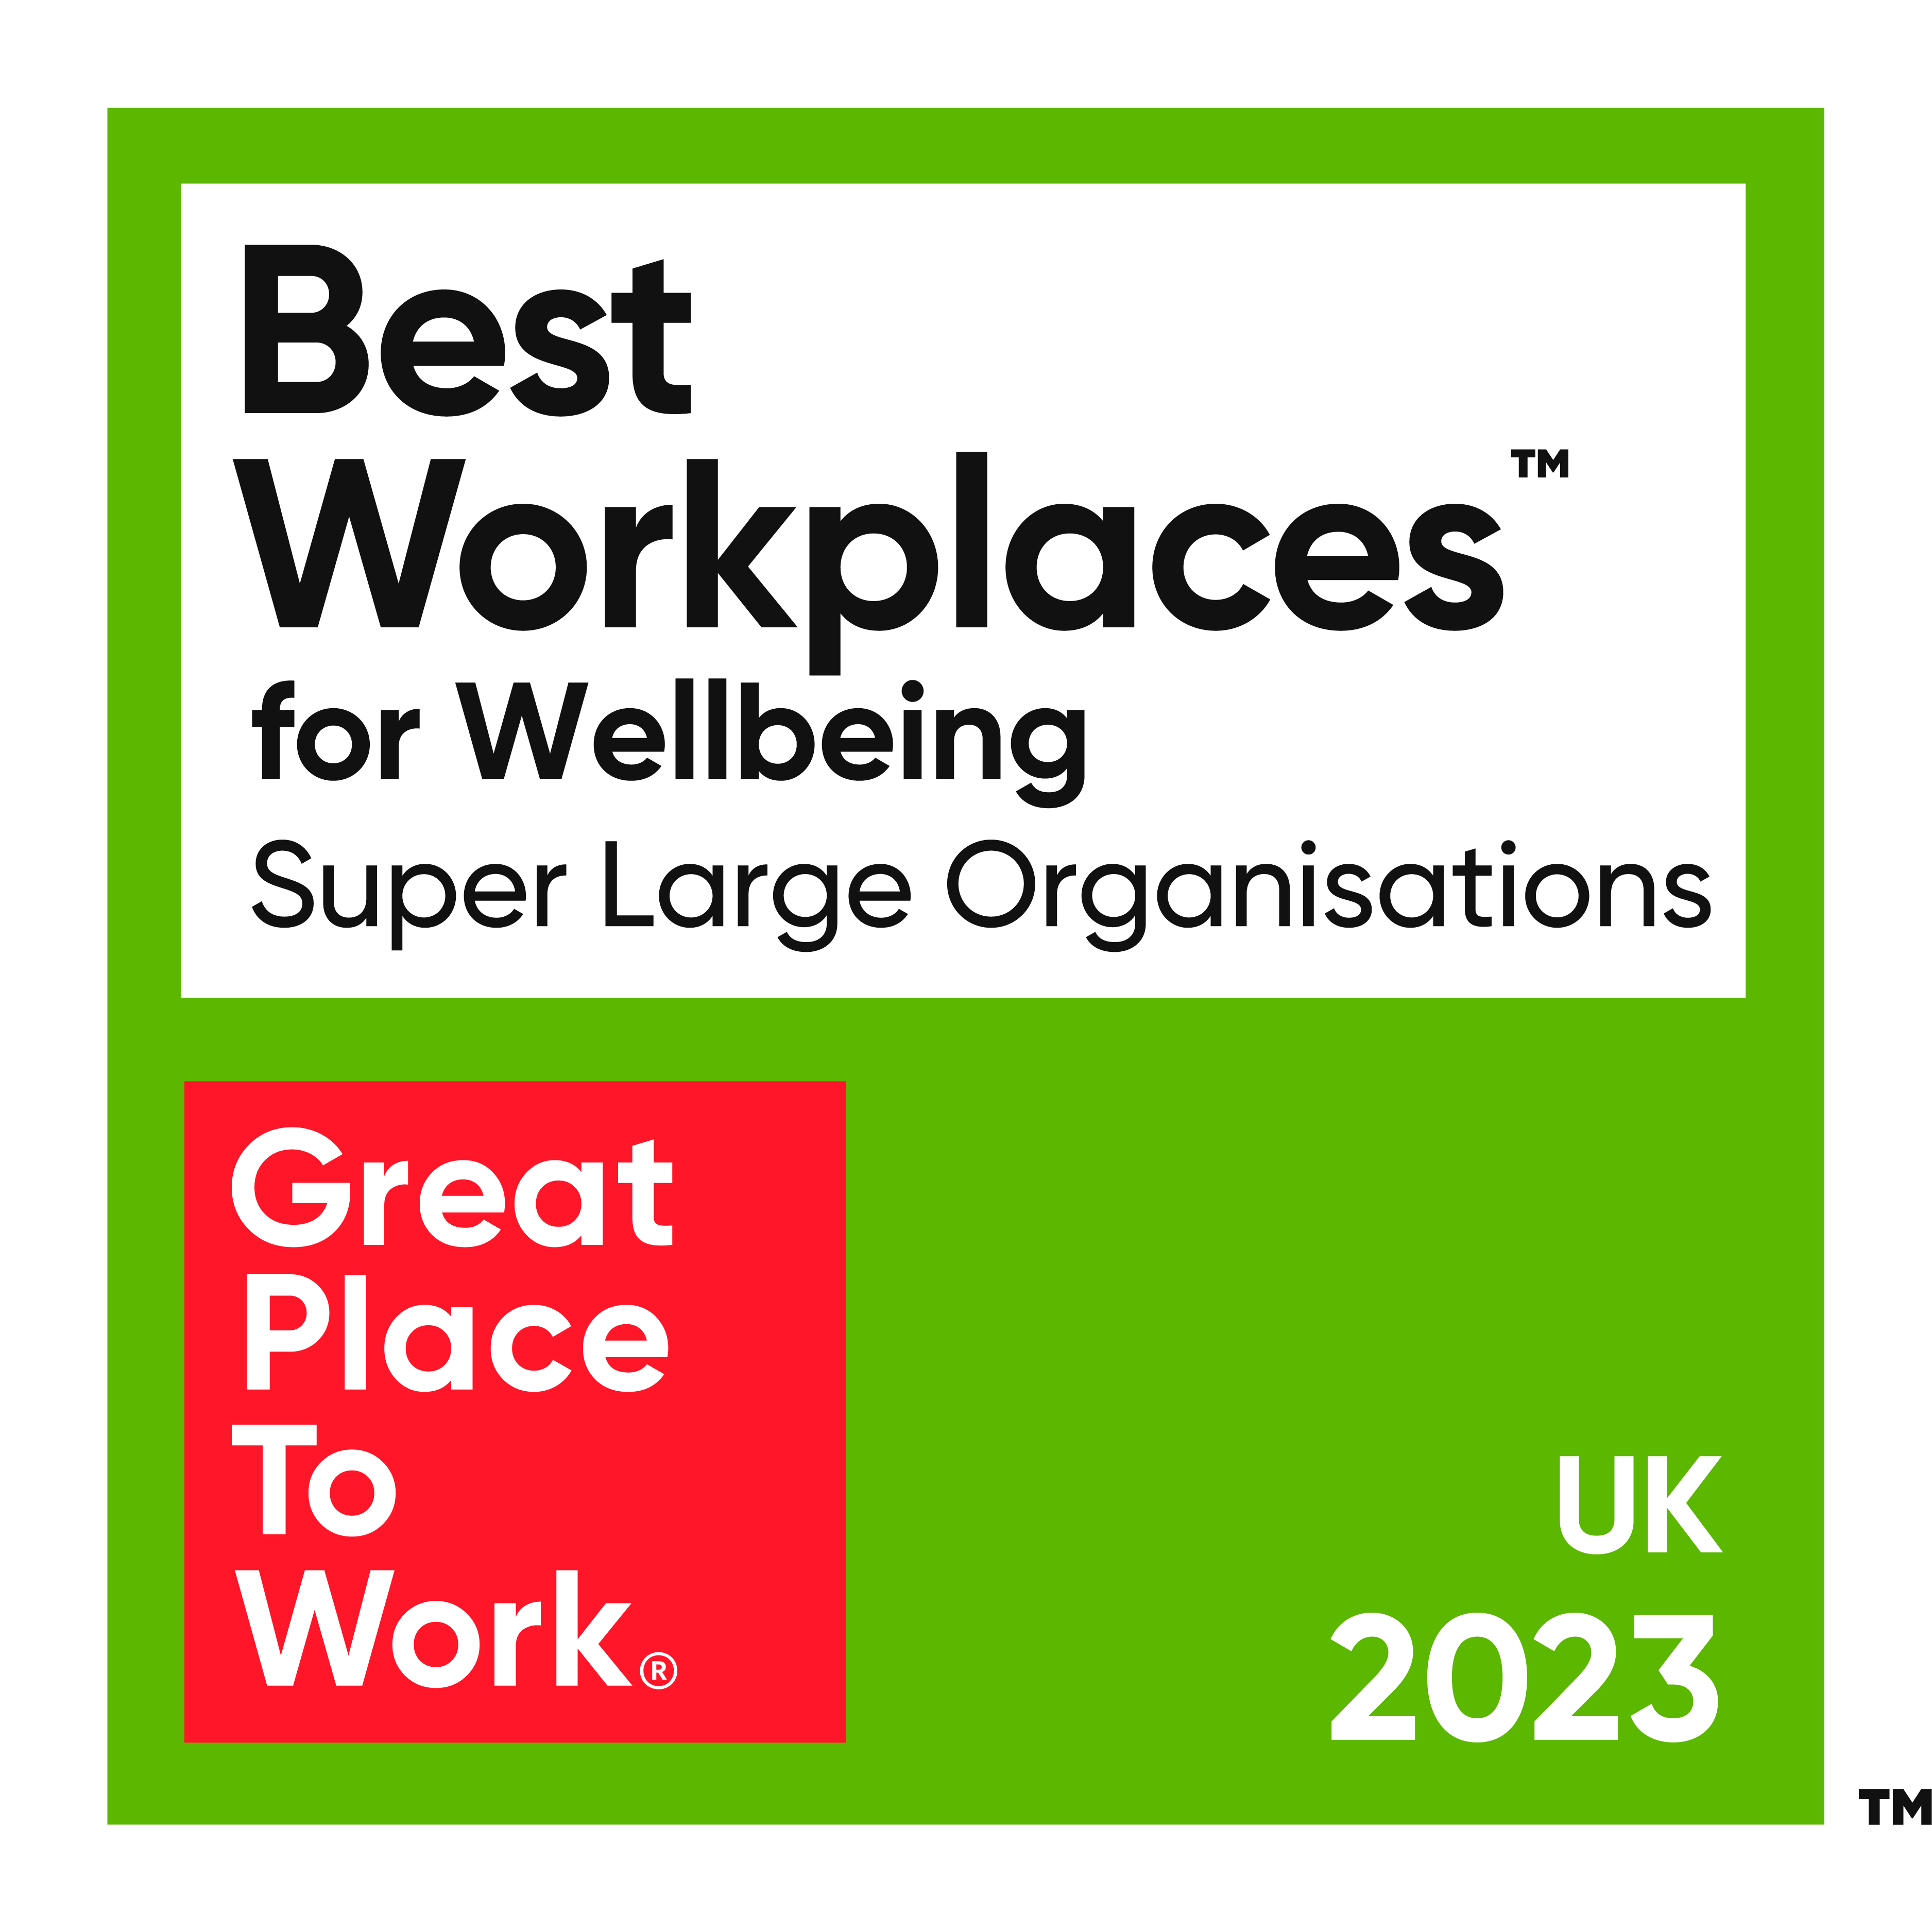 Best Workplaces for Wellbeing logo for Great Place to Work